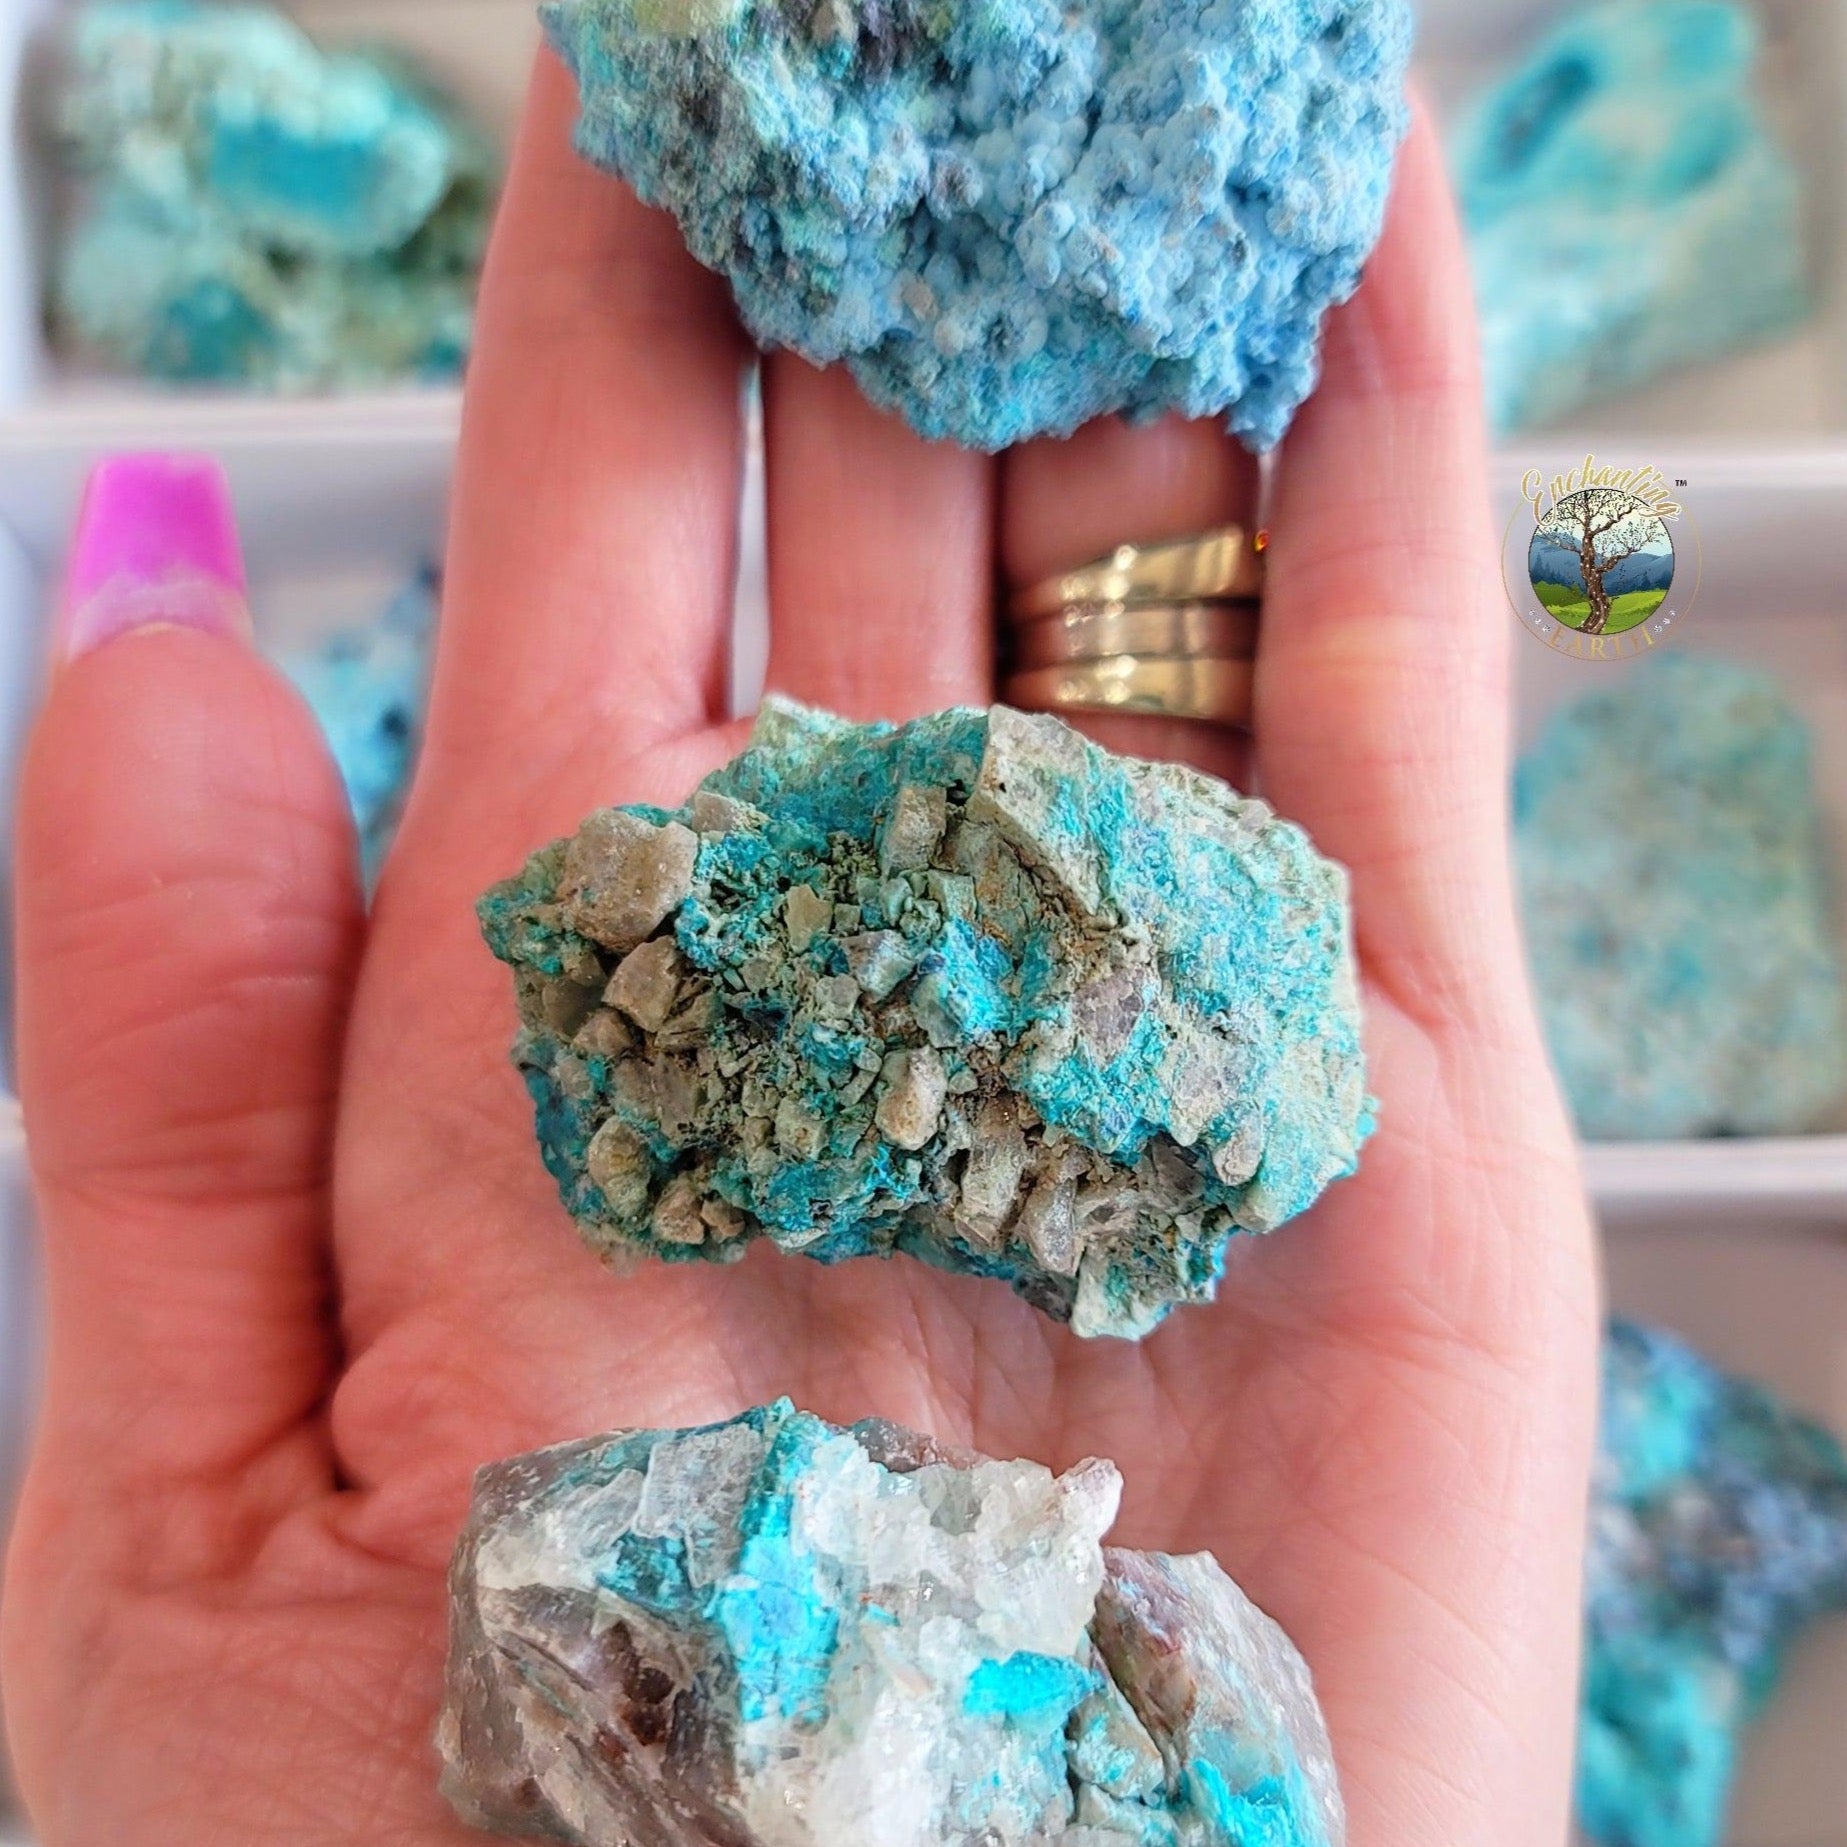 Shattuckite Specimen for Truth, Communication and Intuition